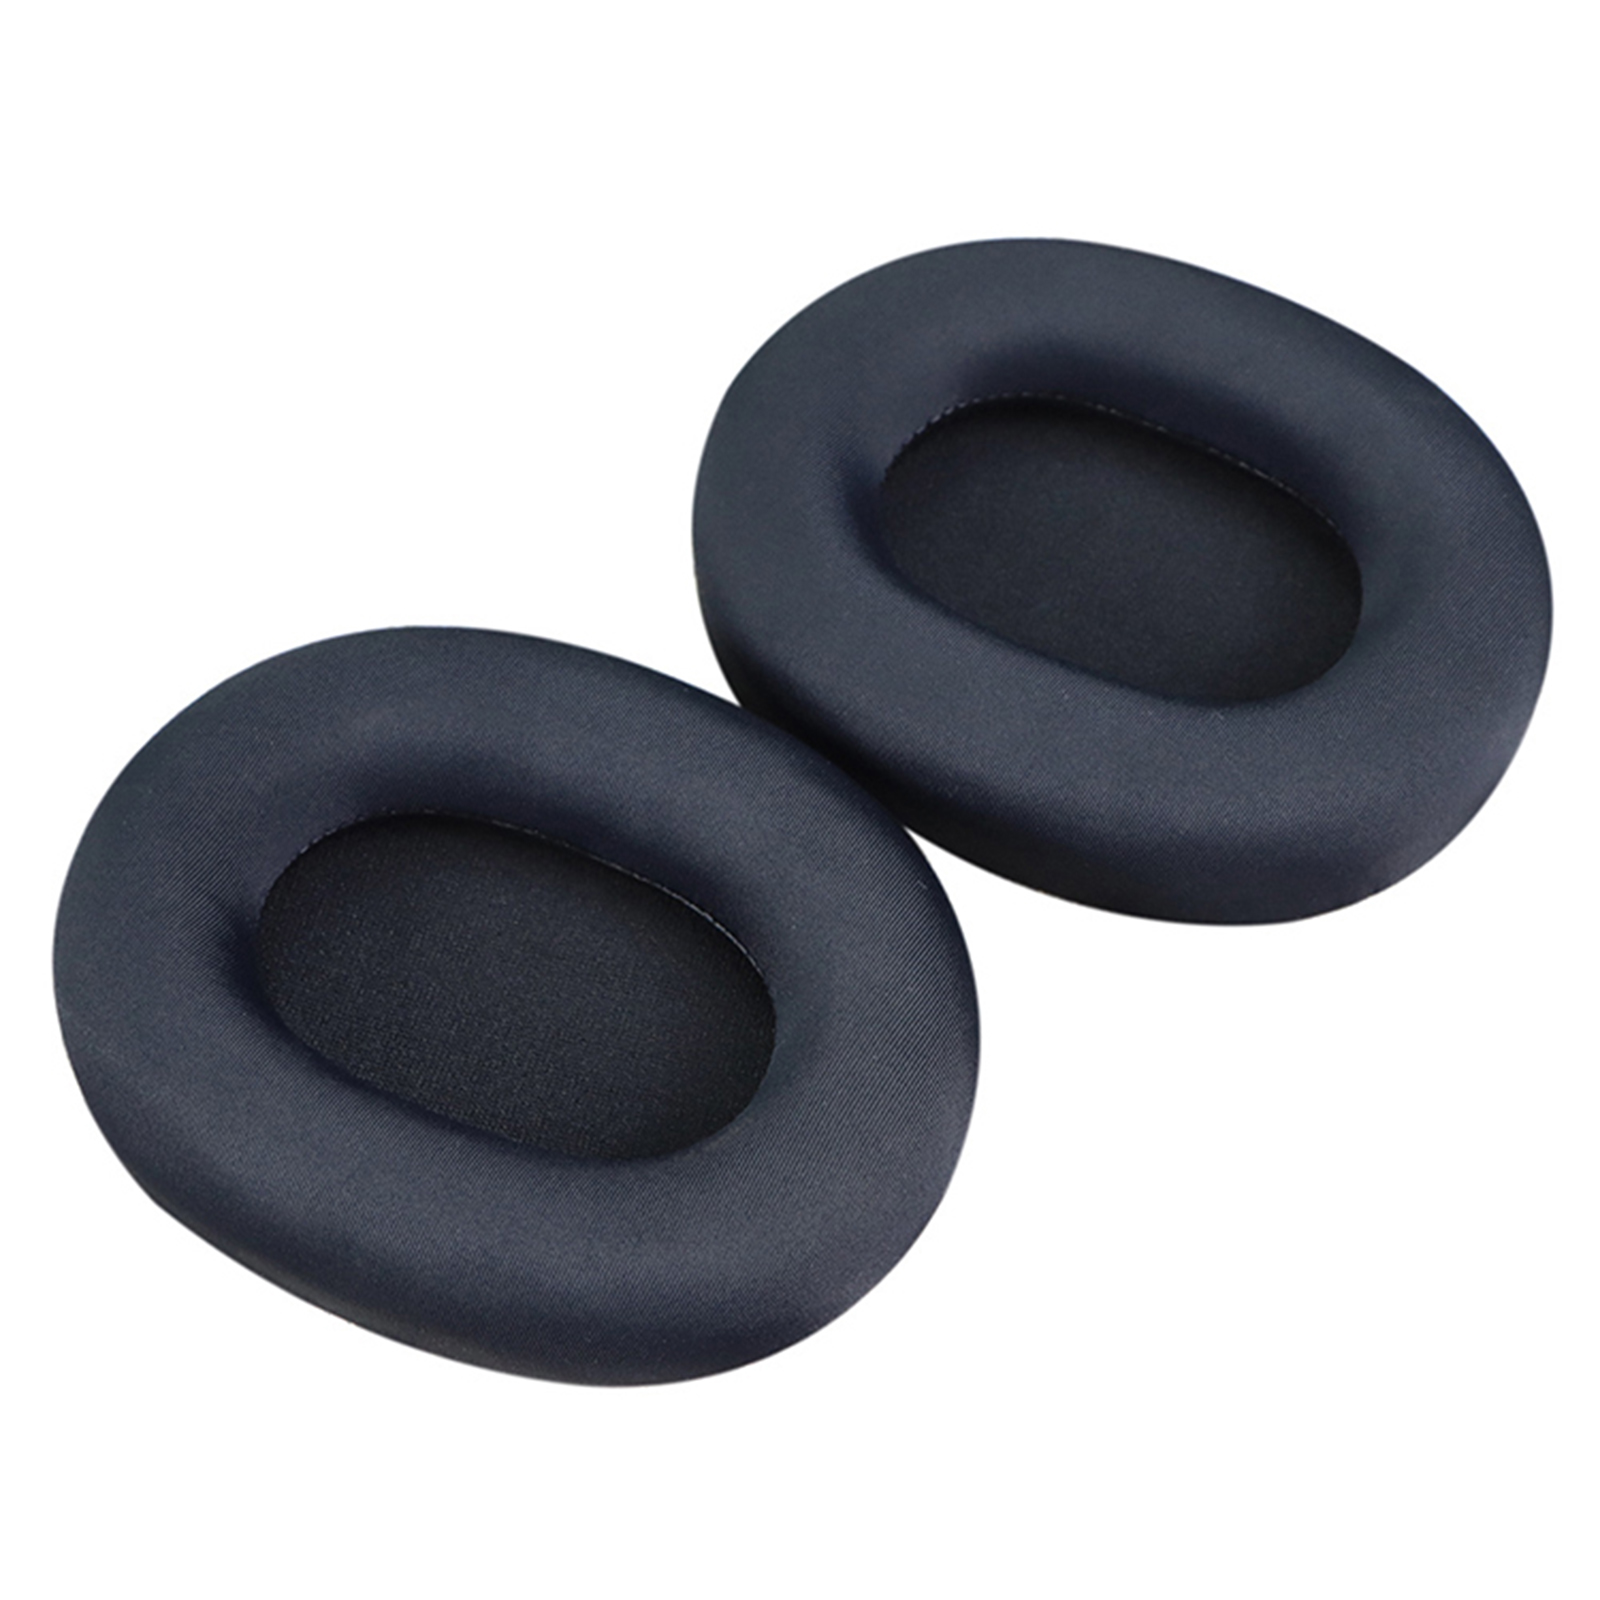 Black Ice Silk Cloth Headphone Sponge Cover with Mounting Clip for Sony